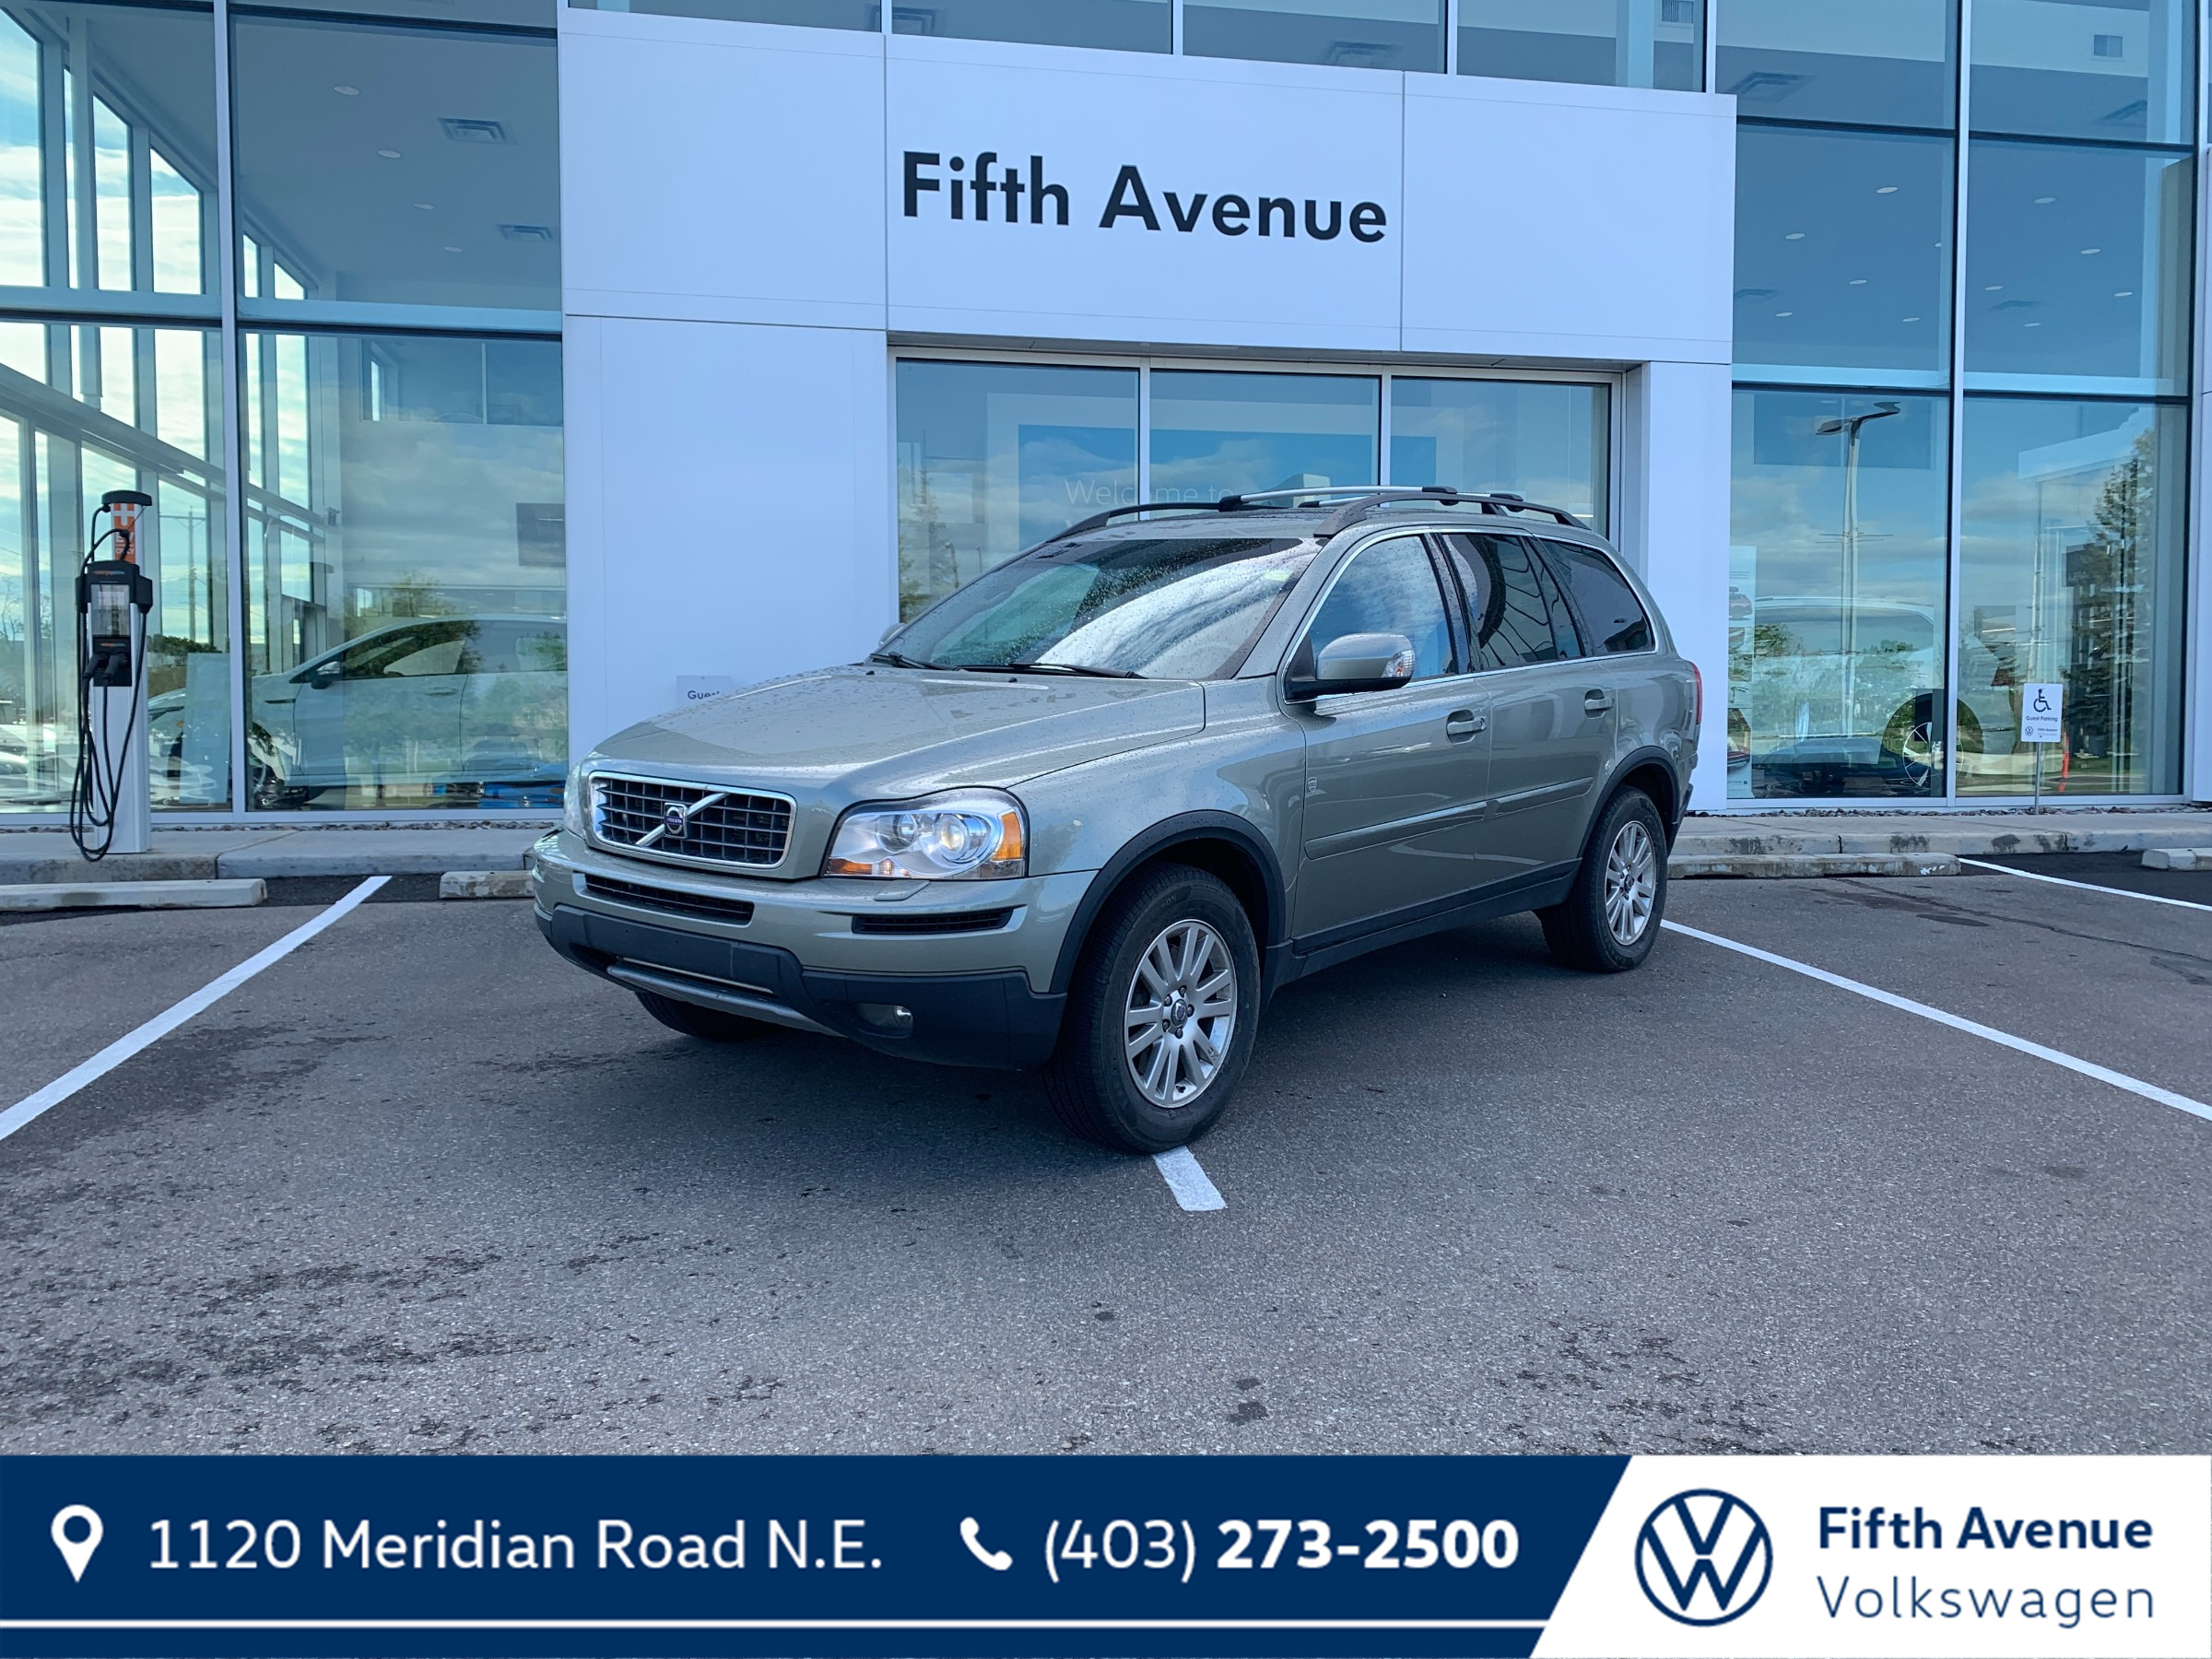 2008 Volvo XC90 AWD I6cyl 7-Seat + New Tires- ODO in Miles